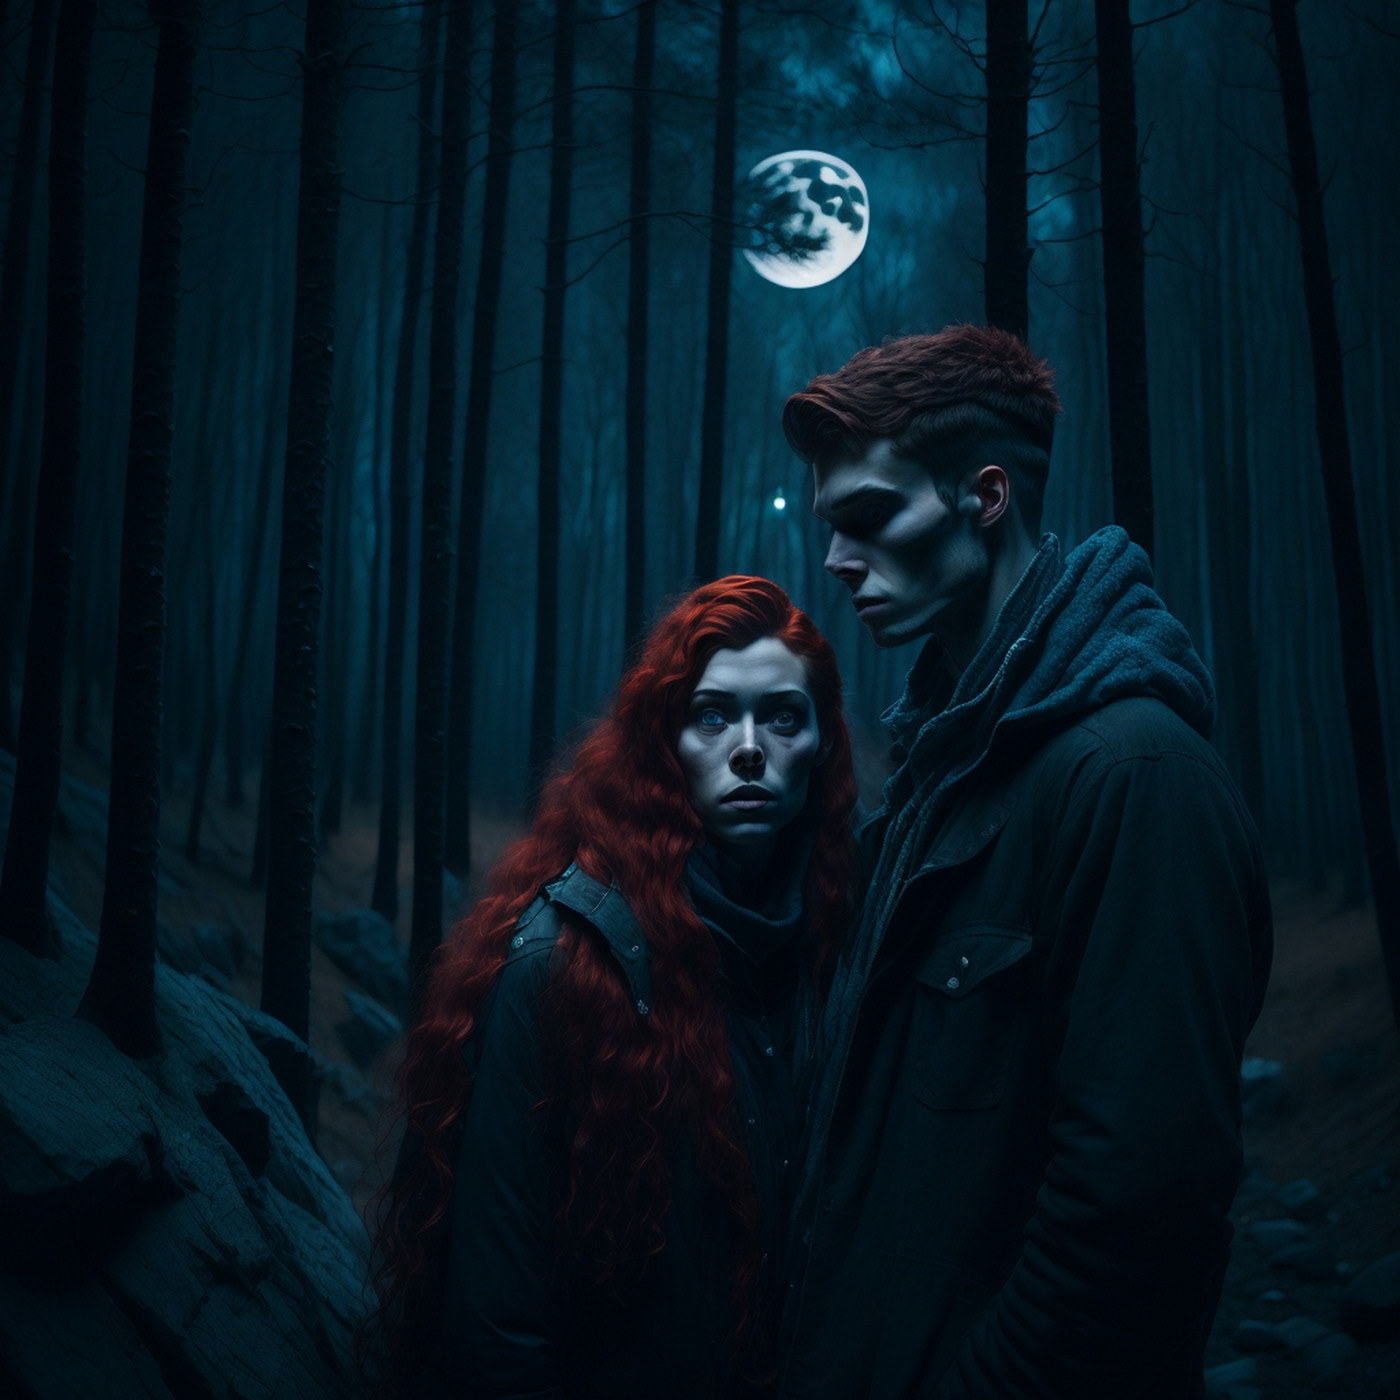 night time survival horror full moon woods redheads pale scared photorealistic